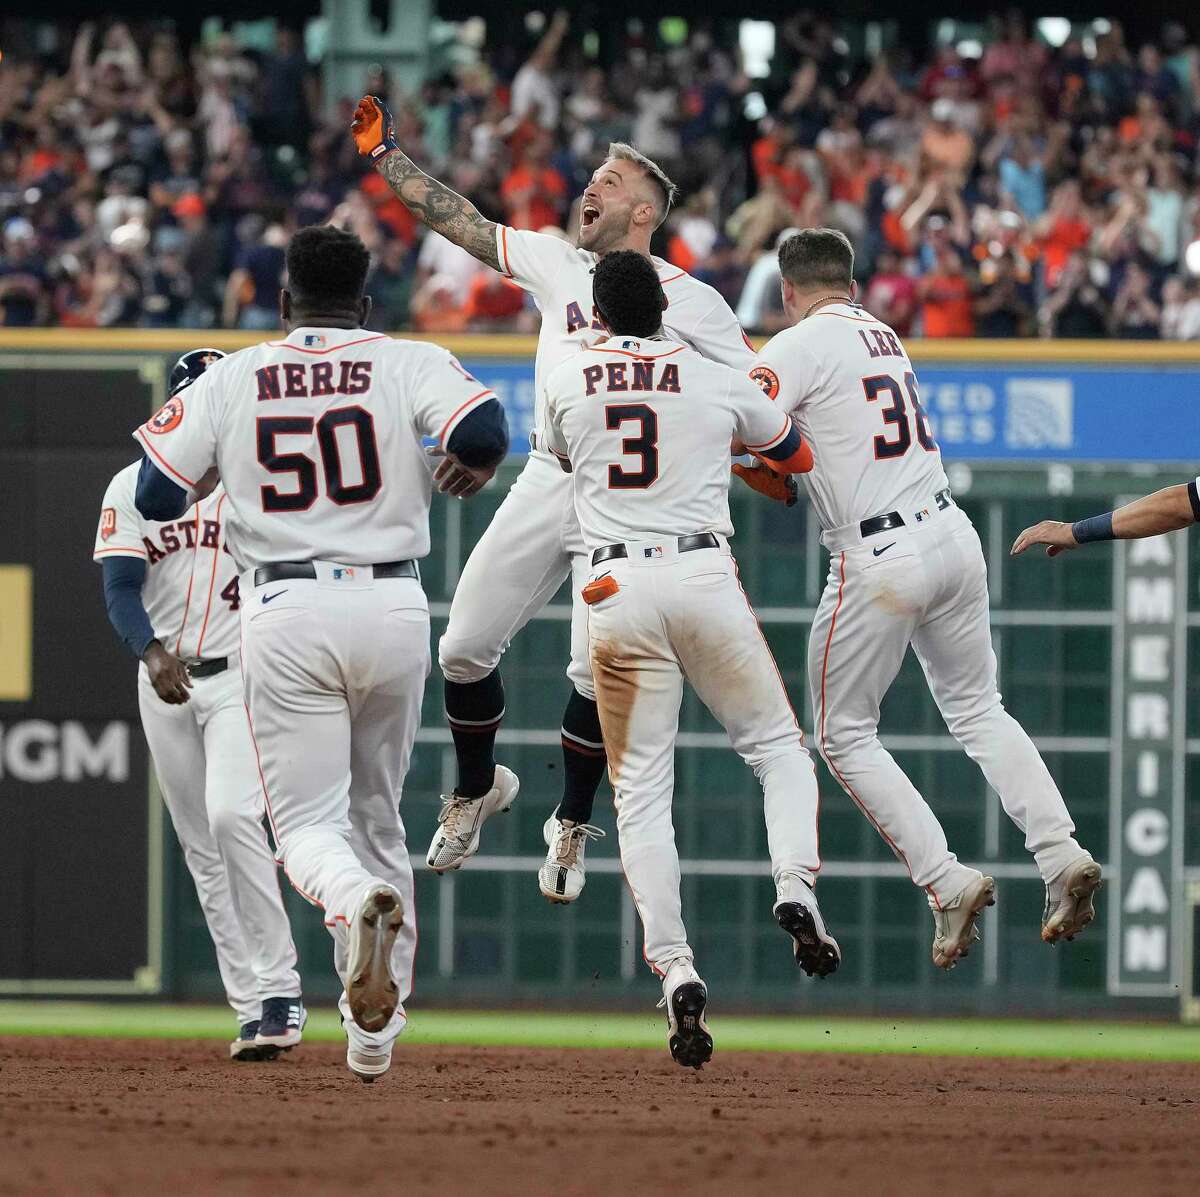 Houston Astros first baseman J.J. Matijevic (13) celebrates as he was surrounded by teammates after his walk off to beat the New York Yankees 3-2 after the ninth inning of Game one of a double head MLB baseball game at Minute Maid Park on Thursday, July 21, 2022 in Houston.